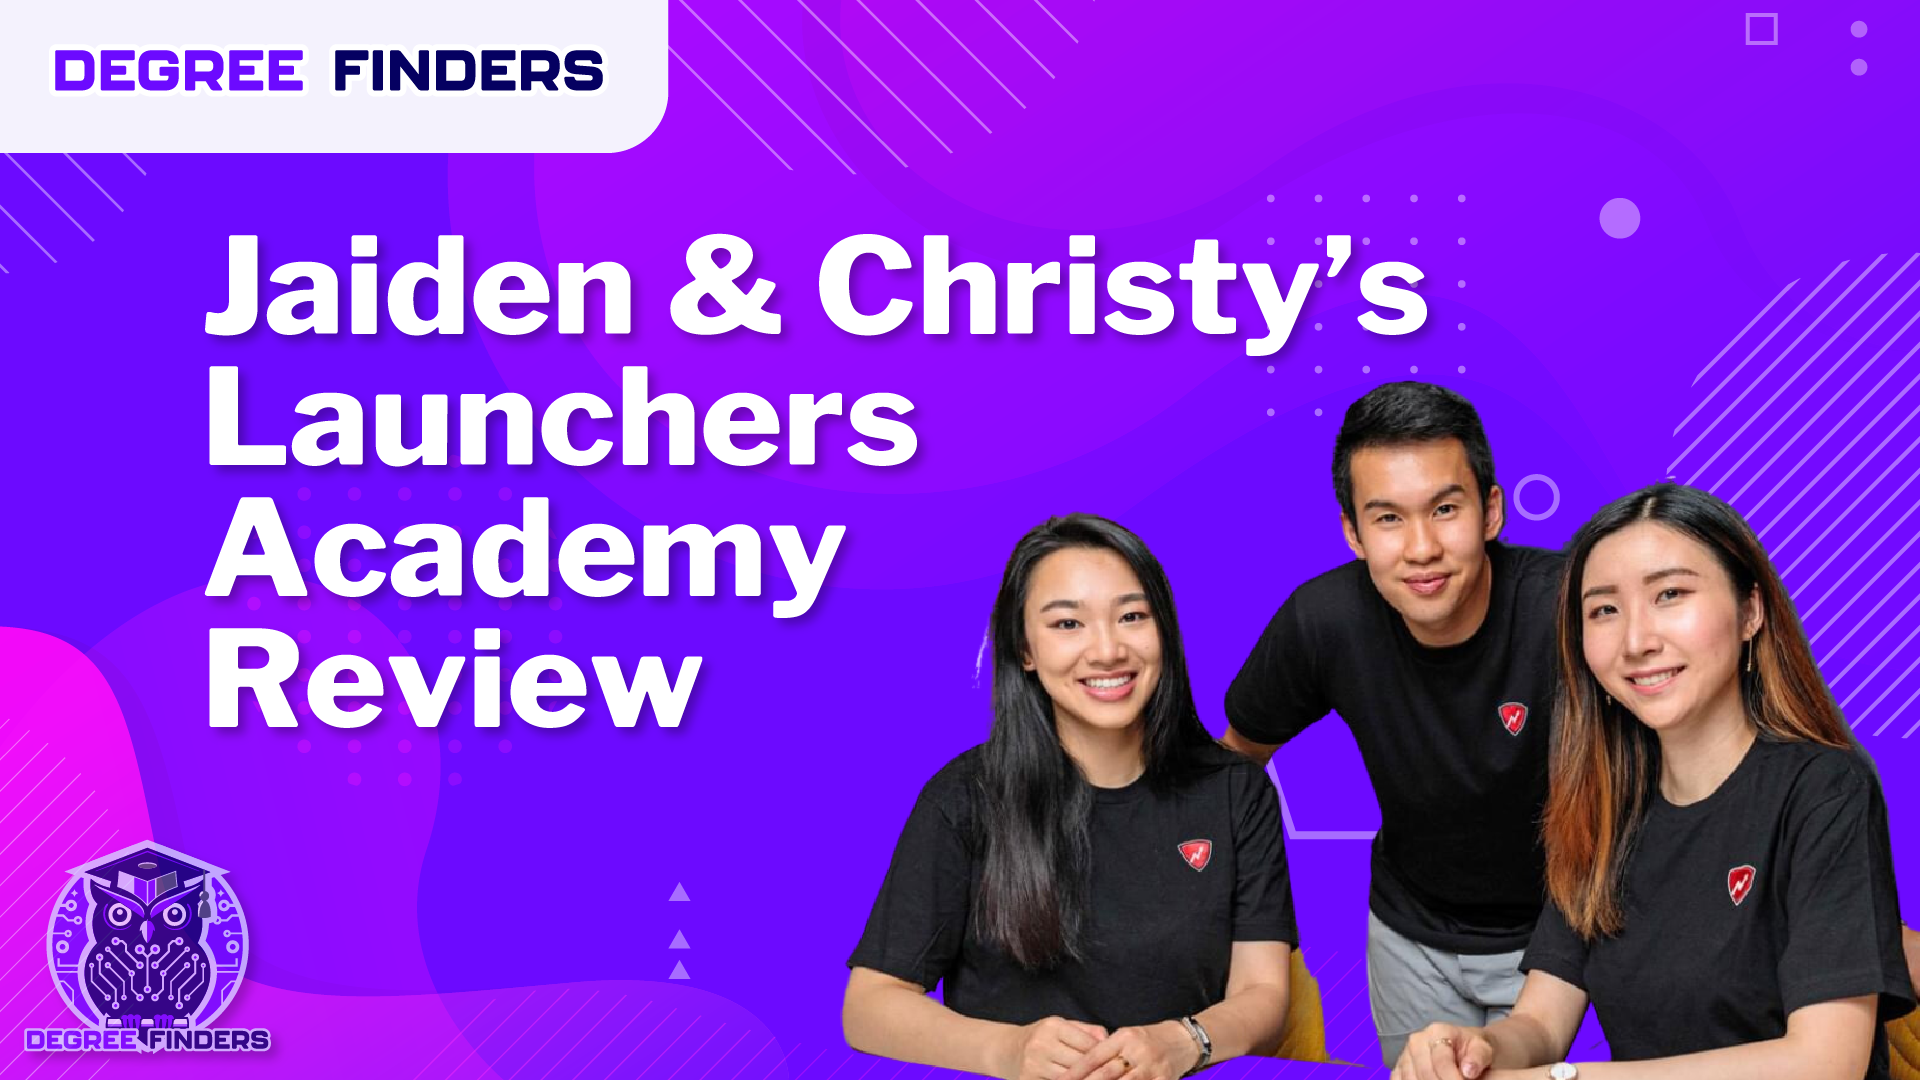 Jaiden & Christy’s Launchers Academy Review